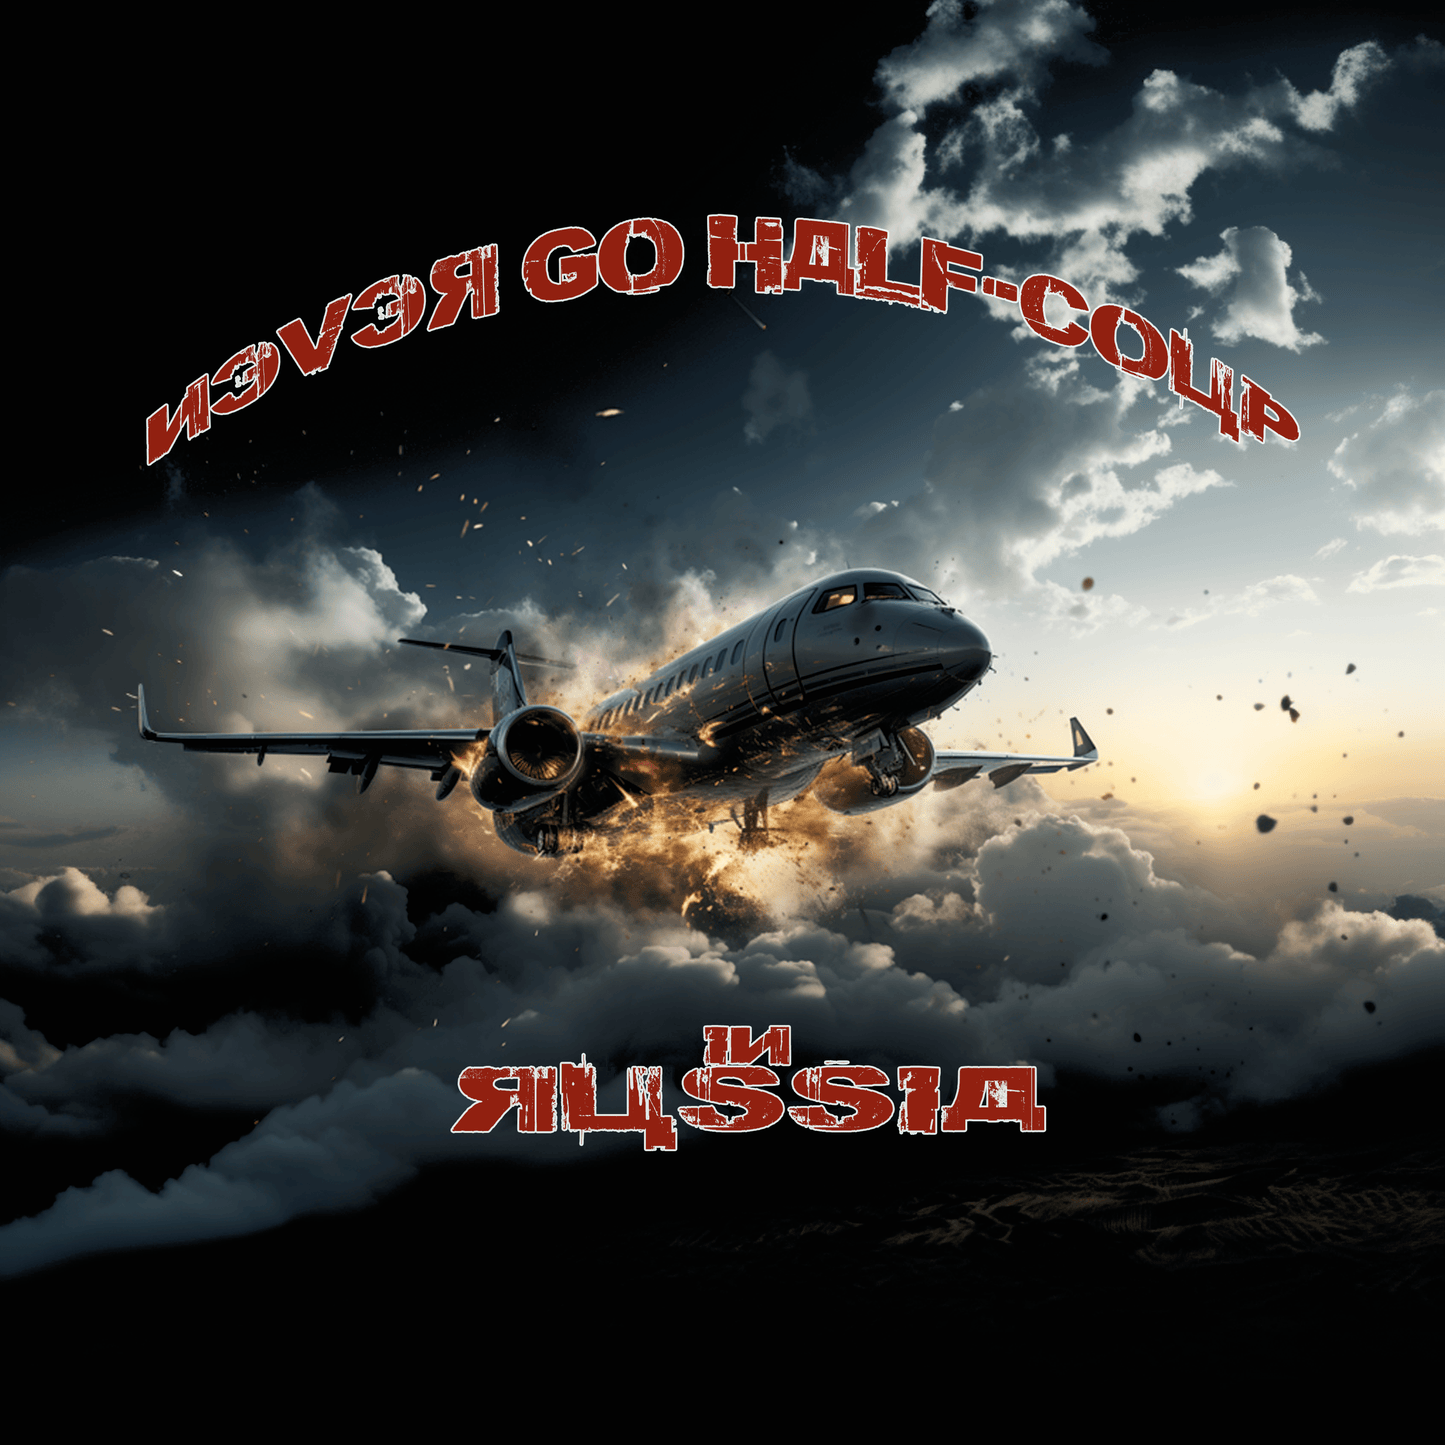 Ruck Fussia Airlines - Inglorious Amateurs